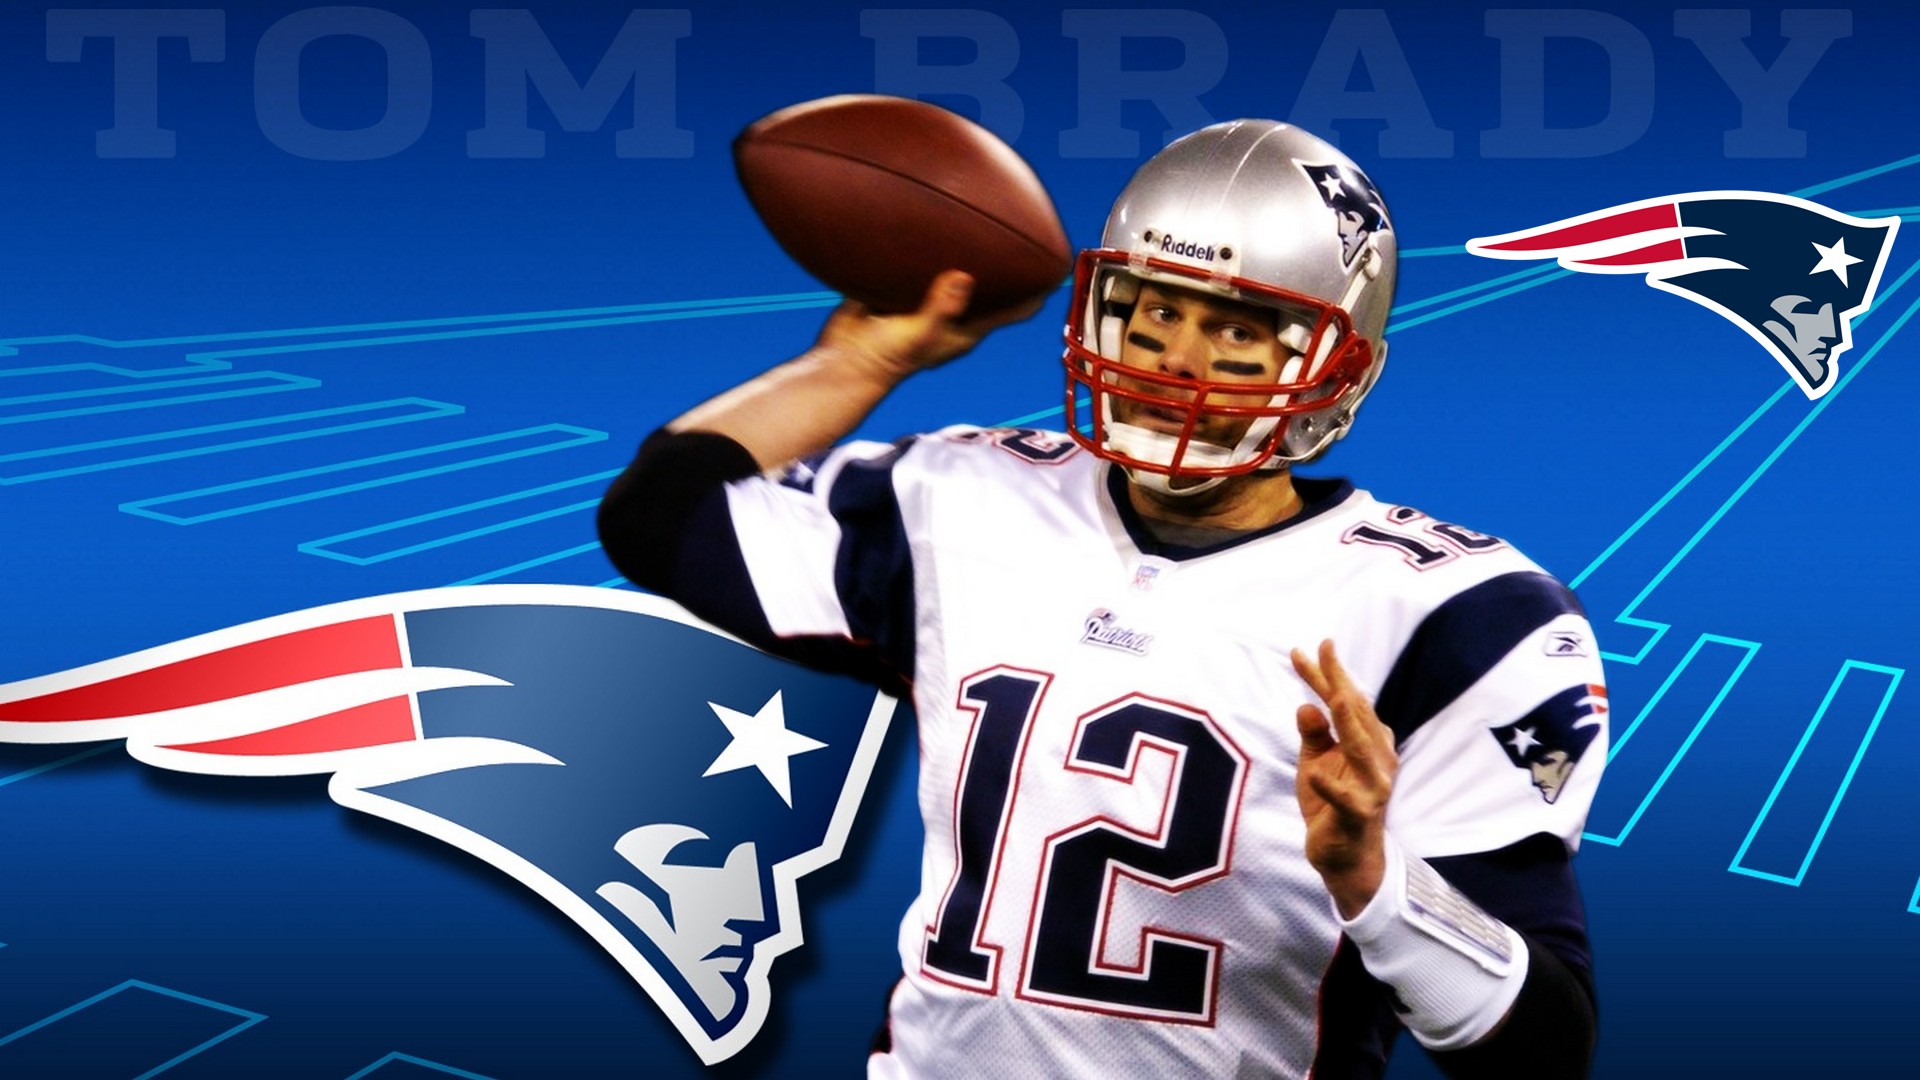 Tom Brady Super Bowl Desktop Wallpapers With Resolution 1920X1080 pixel. You can make this wallpaper for your Mac or Windows Desktop Background, iPhone, Android or Tablet and another Smartphone device for free